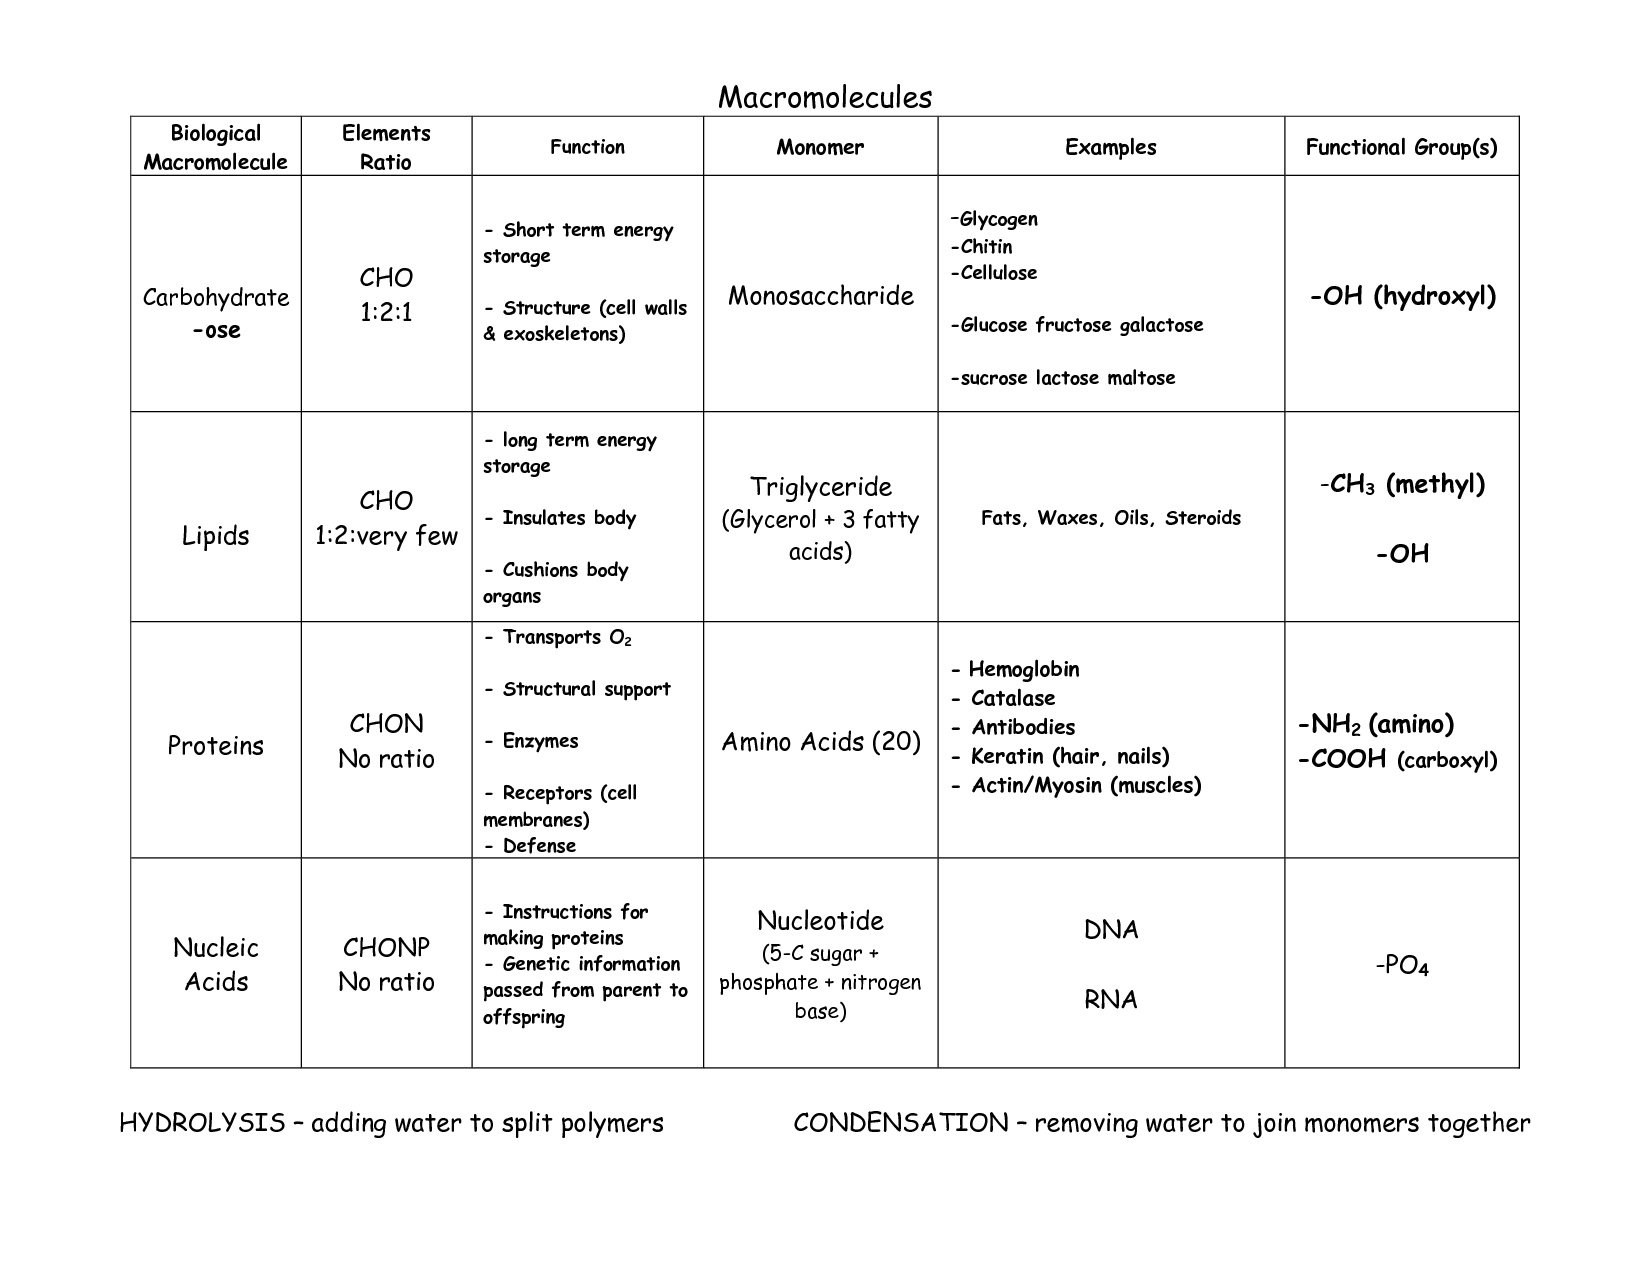 carbohydrates-worksheet-carbohydrates-polysaccharide